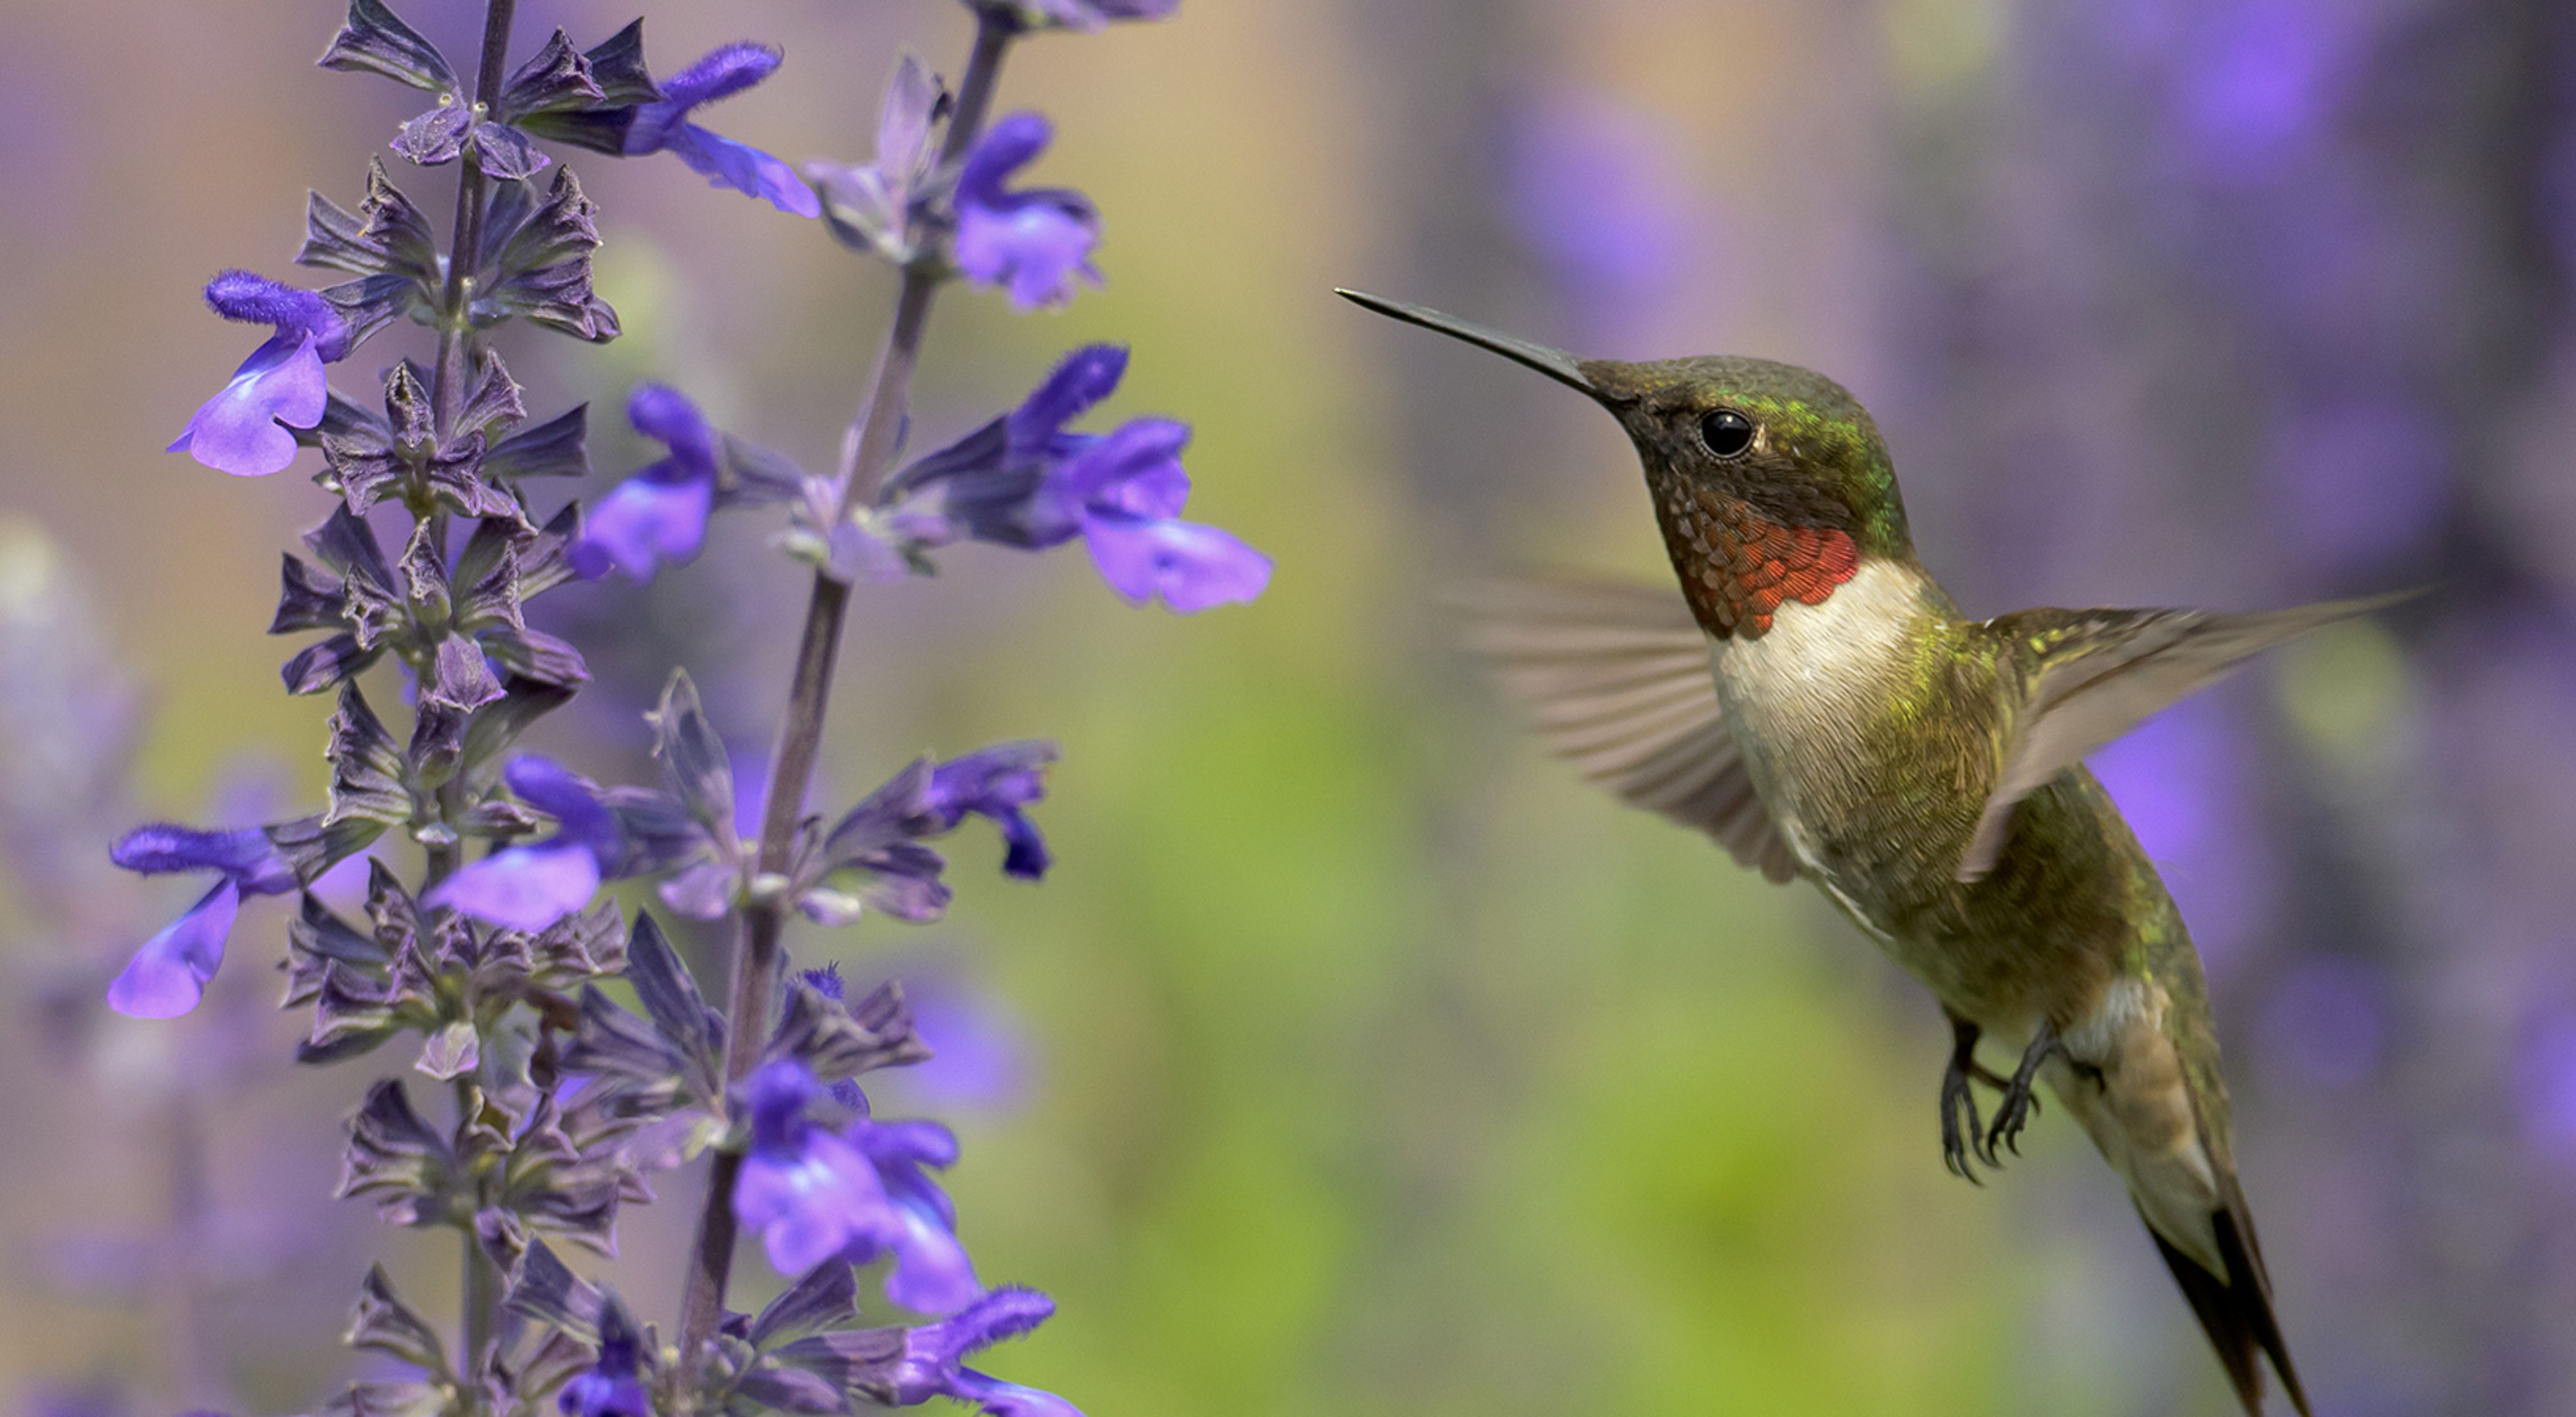 A ruby throated hummingbird with an irridescent green head hovers next to a long stemmed plant with purple flowers. 